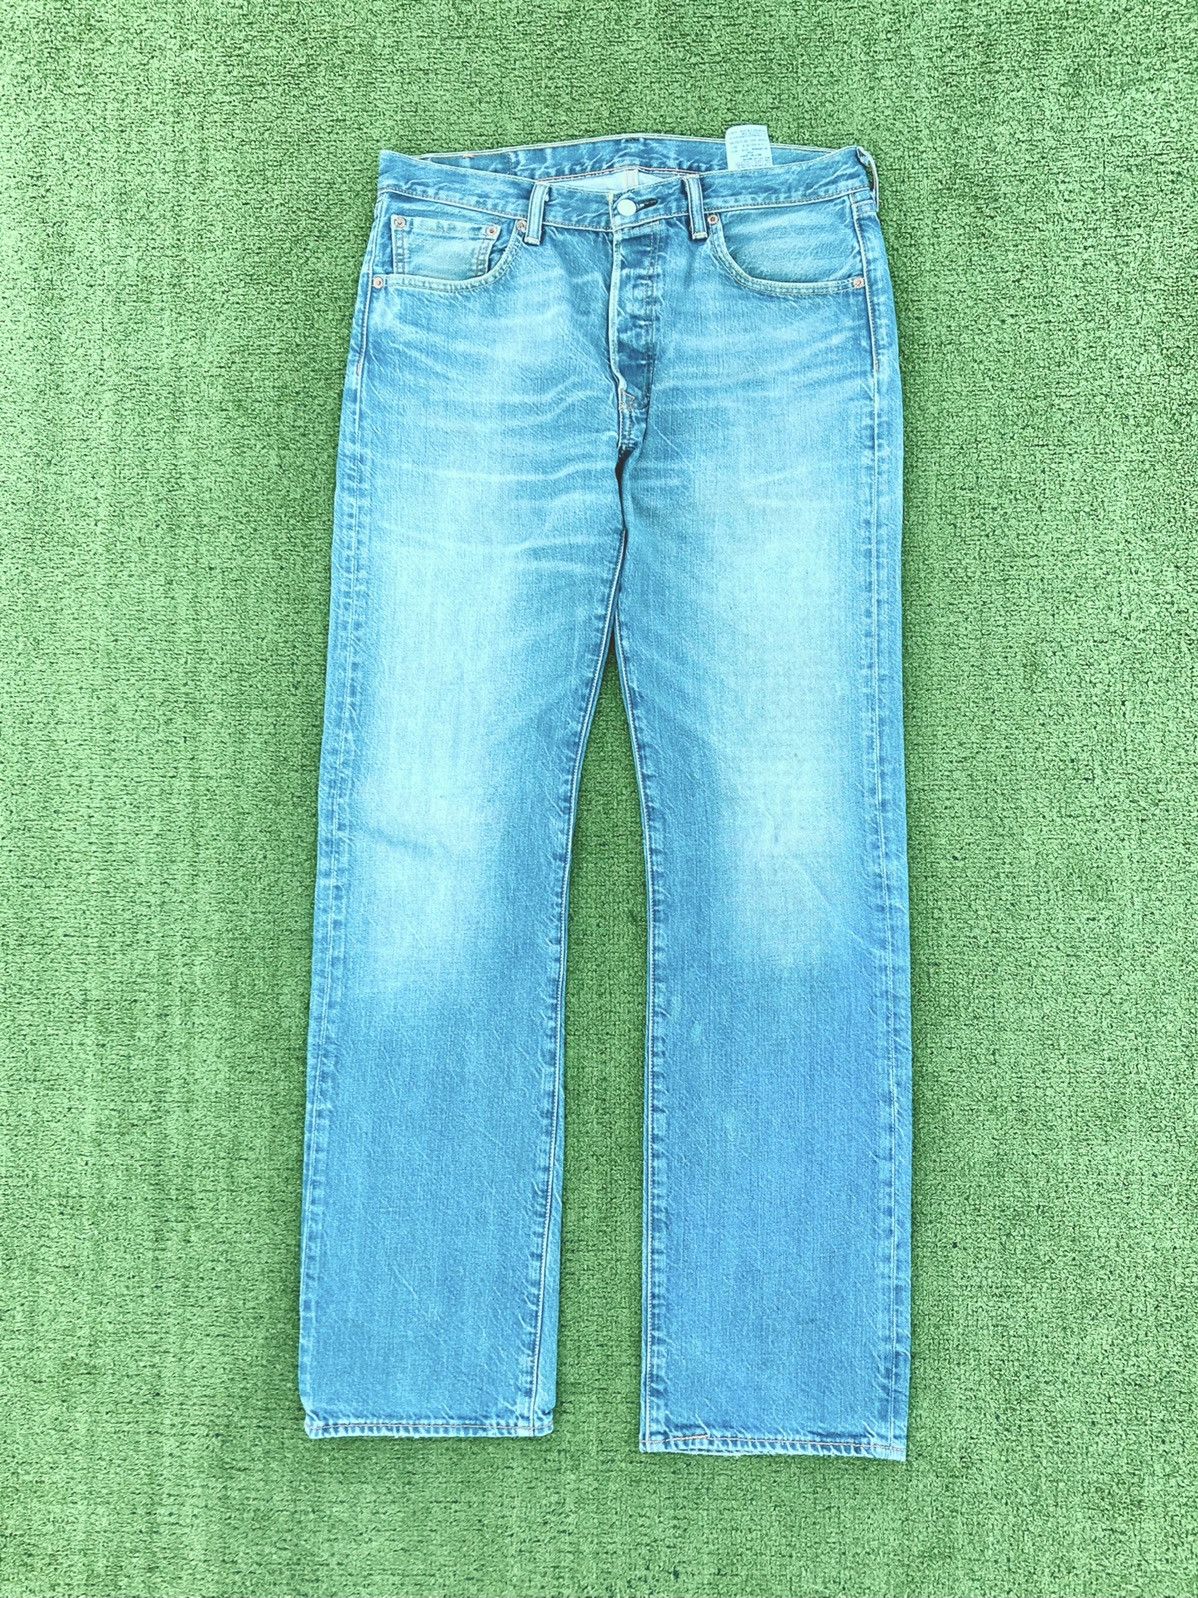 Vintage Vintage Washed Baby Blue Levi’s 501 from 00s Size US 33 - 2 Preview